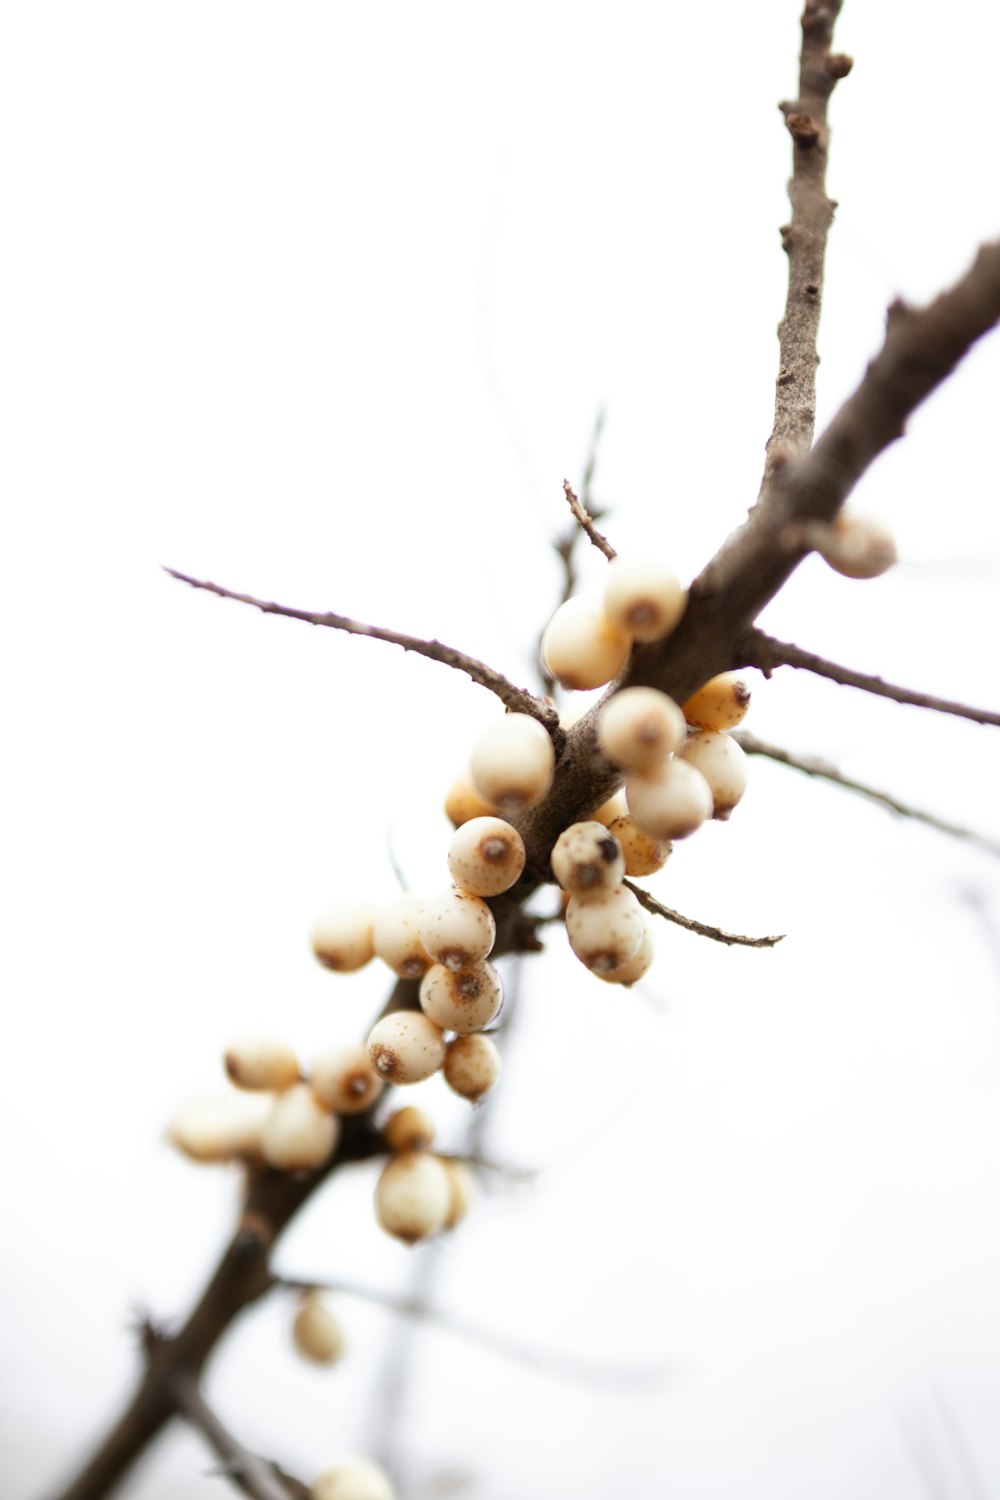 brown round fruits on brown tree branch